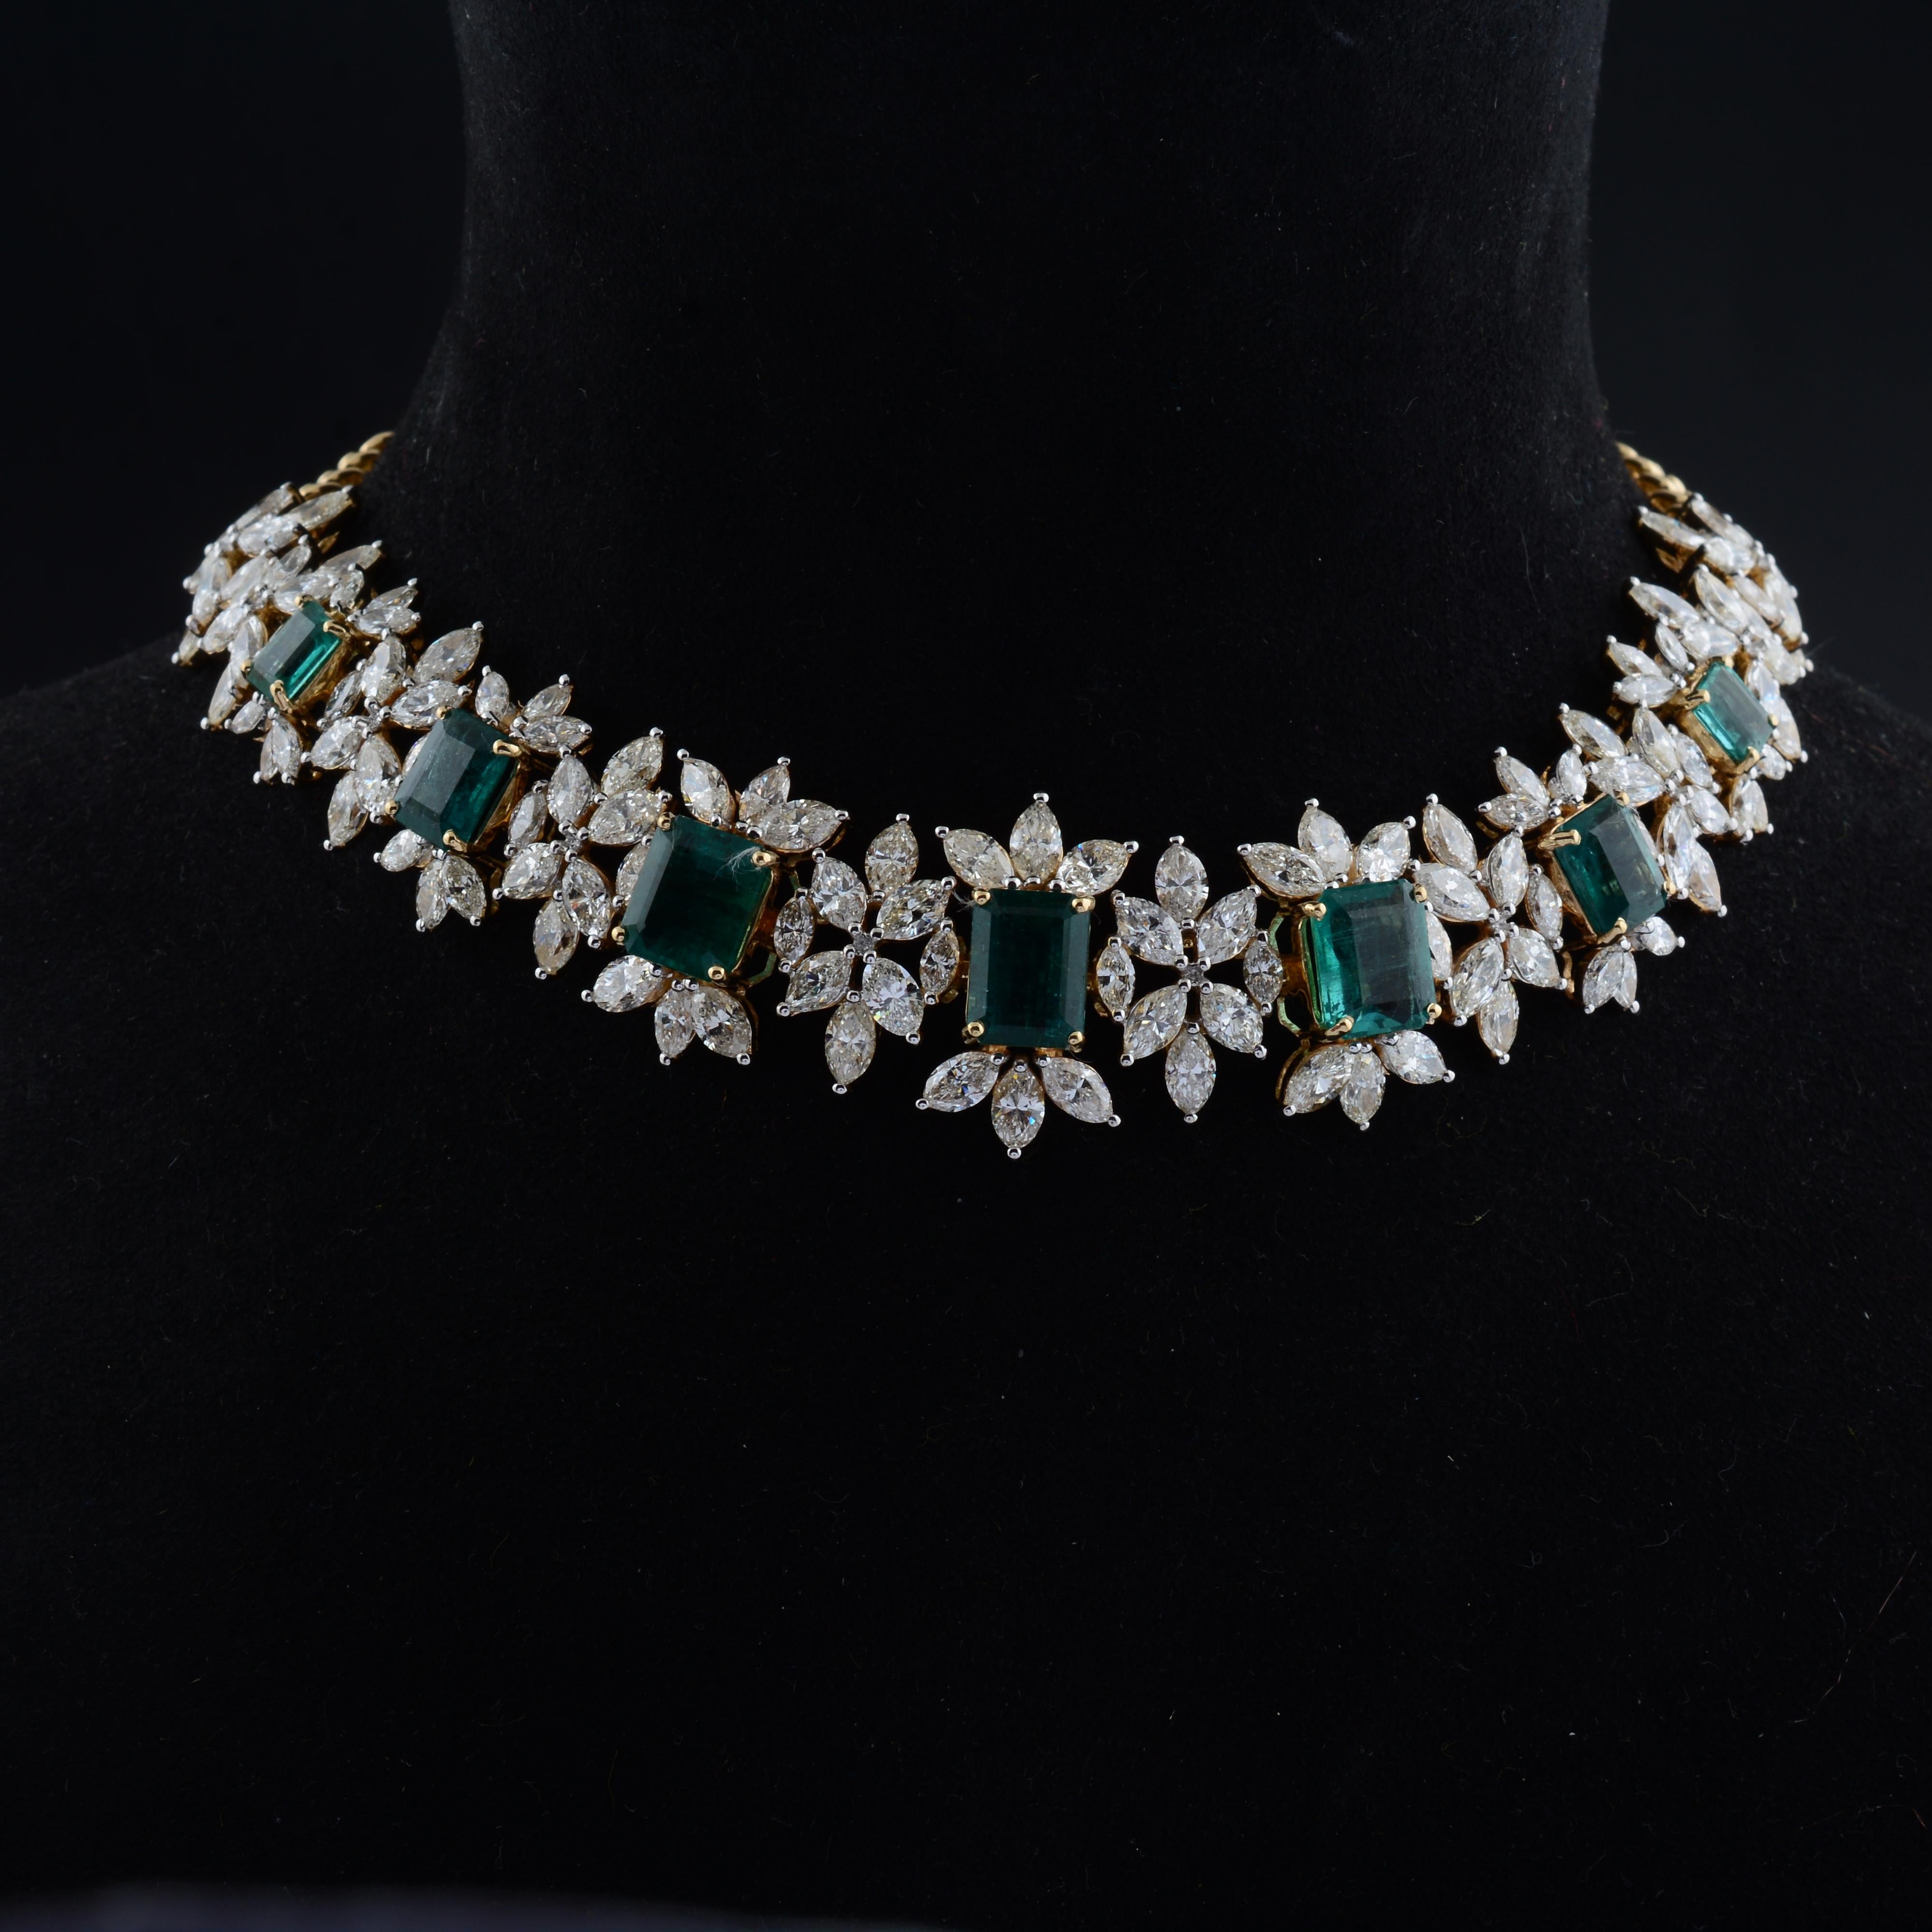 The choker necklace is crafted from 18 karat white gold, chosen for its luxurious appearance and durability. The white gold setting perfectly complements the emerald and diamonds, creating a harmonious fusion of elegance and strength. The intricate